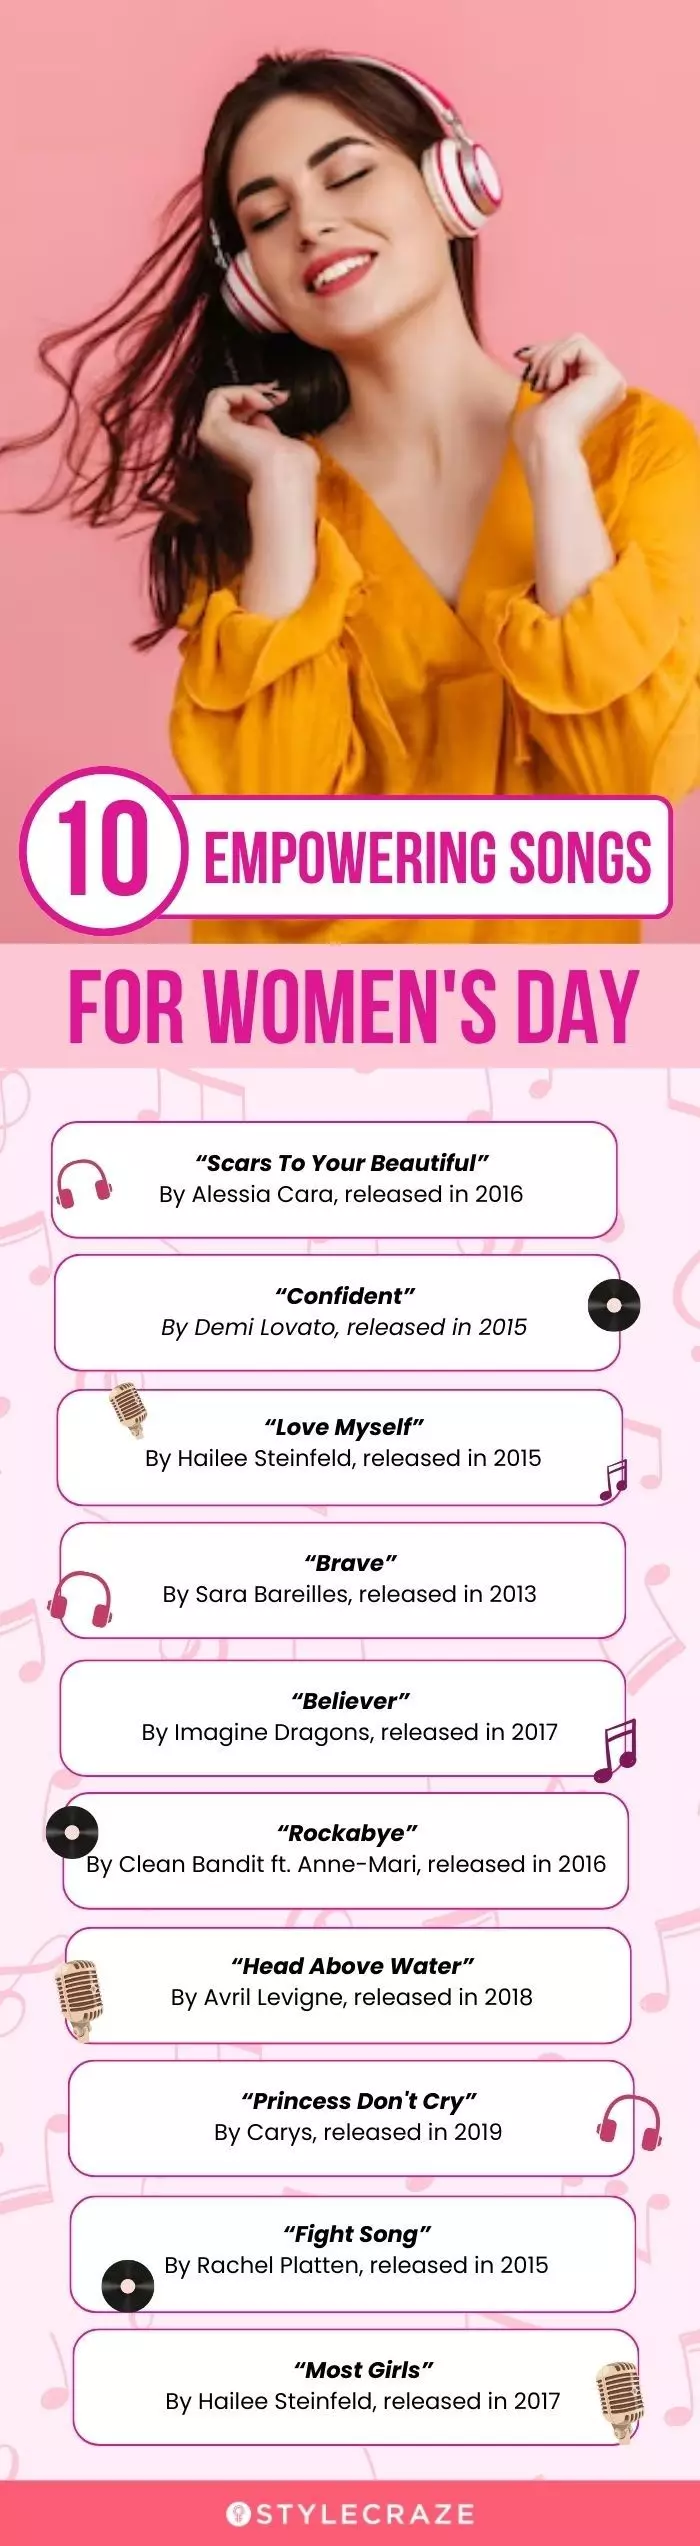 10 empowering songs for women s day (infographic)